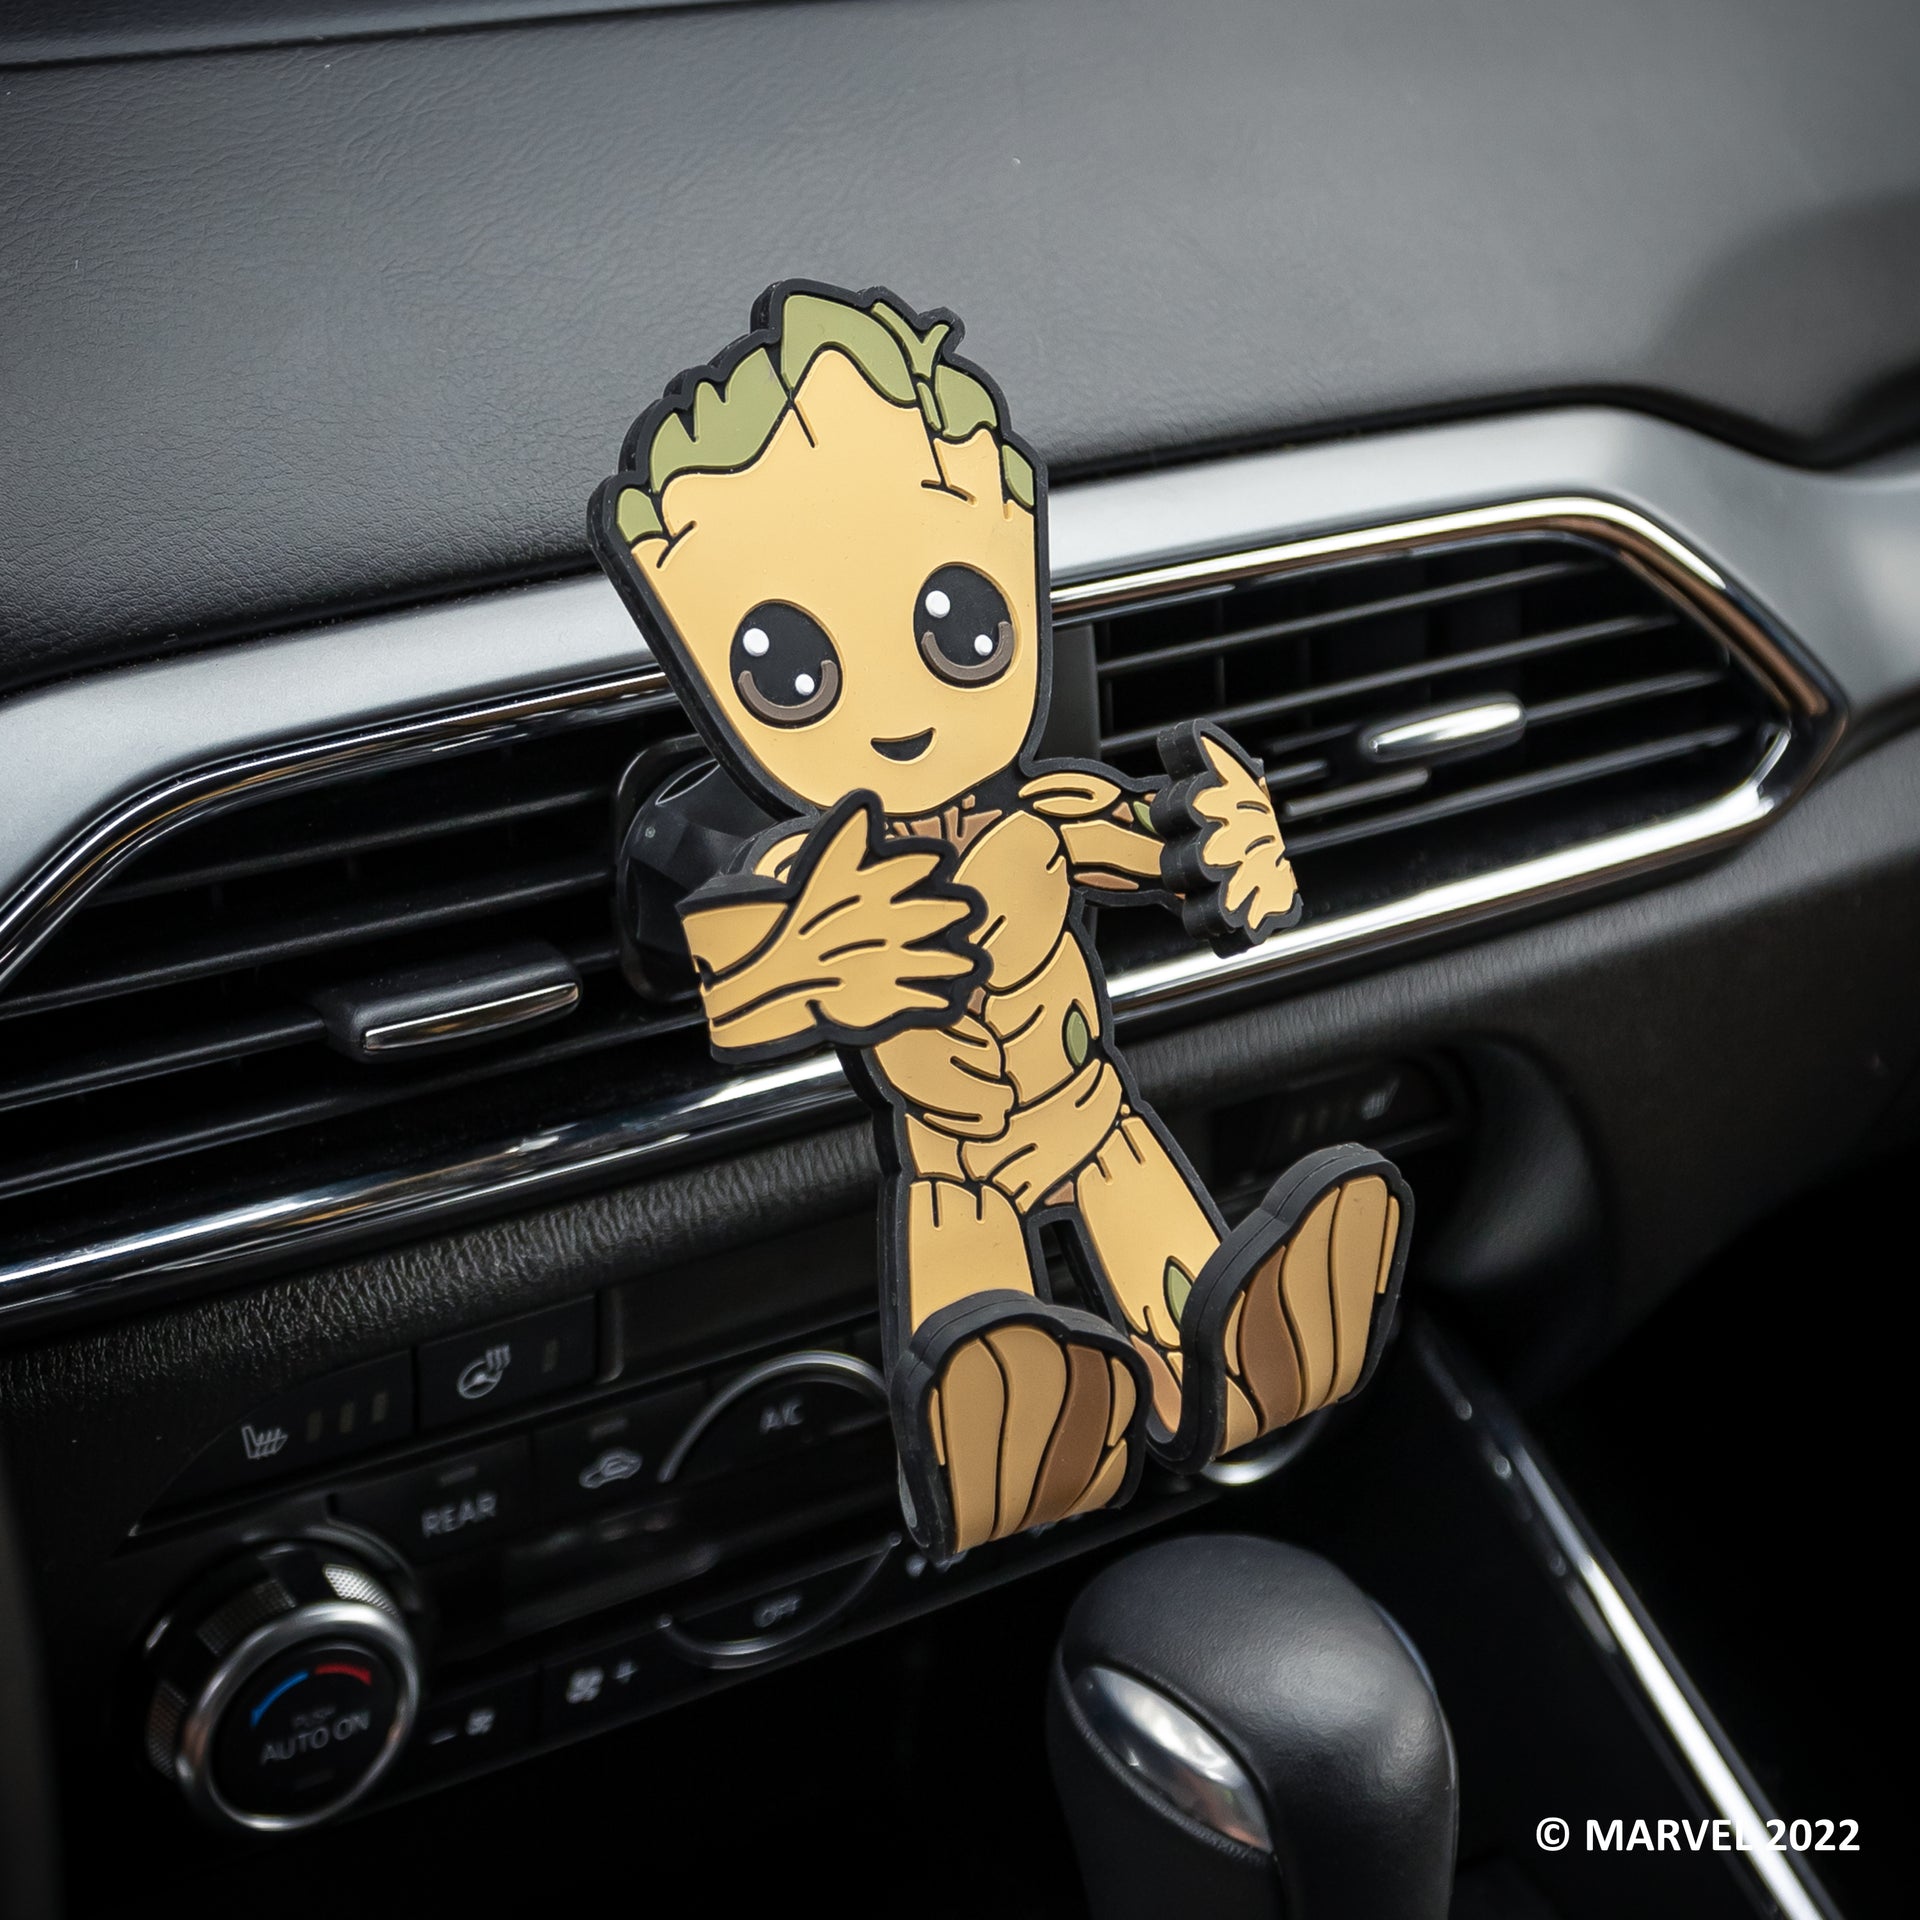 Image of Marvel Groot Hug Buddy attached to a car air vent, awaiting a cell-phone to be placed in its grasp